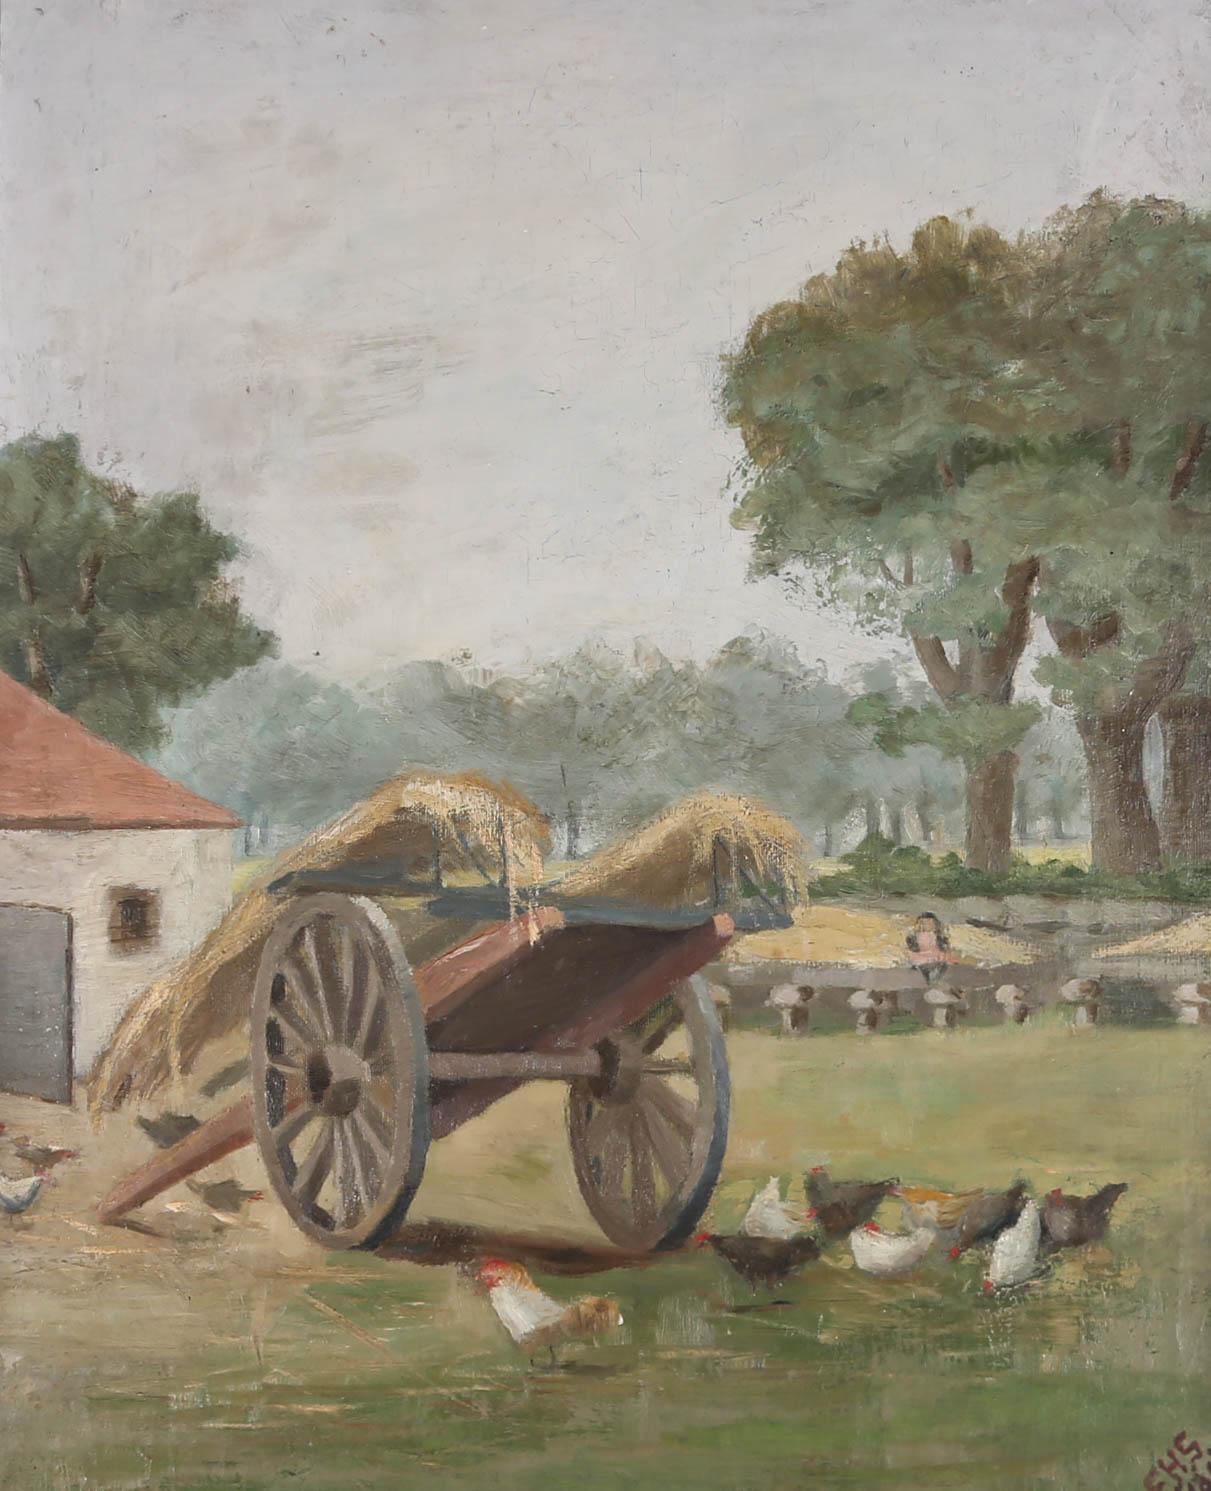 E.H.S - Framed 1896 Oil, Hay Cart in the Farmyard - Painting by E.H.S.